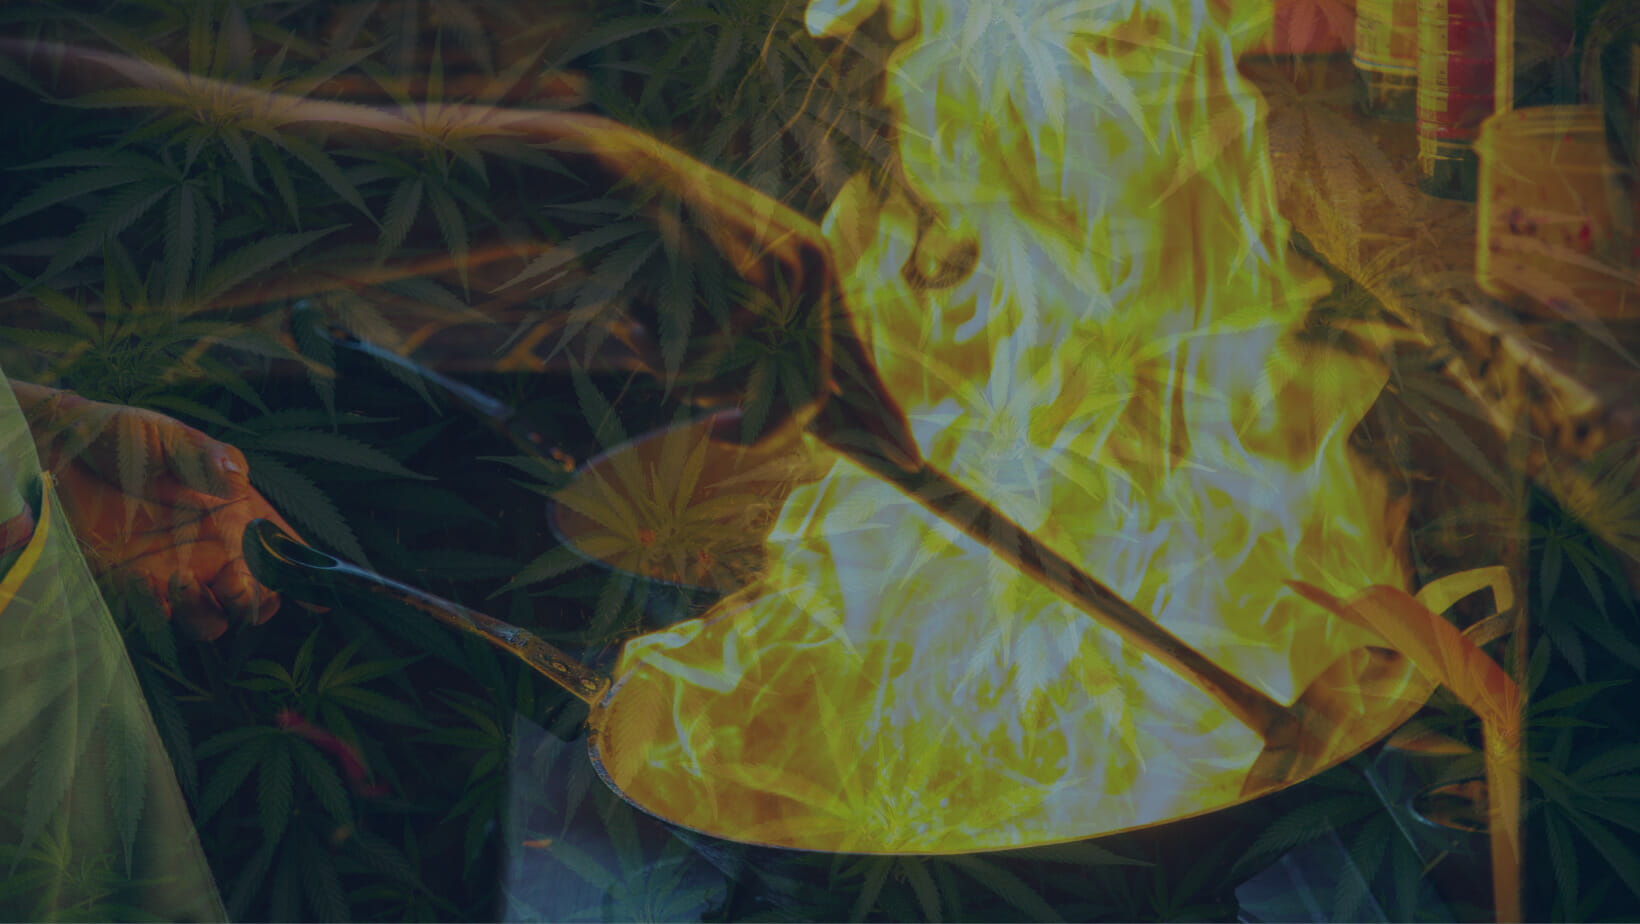 semi-transparent overlay of cannabis leaves over an image of a person cooking from a flaming frying pan